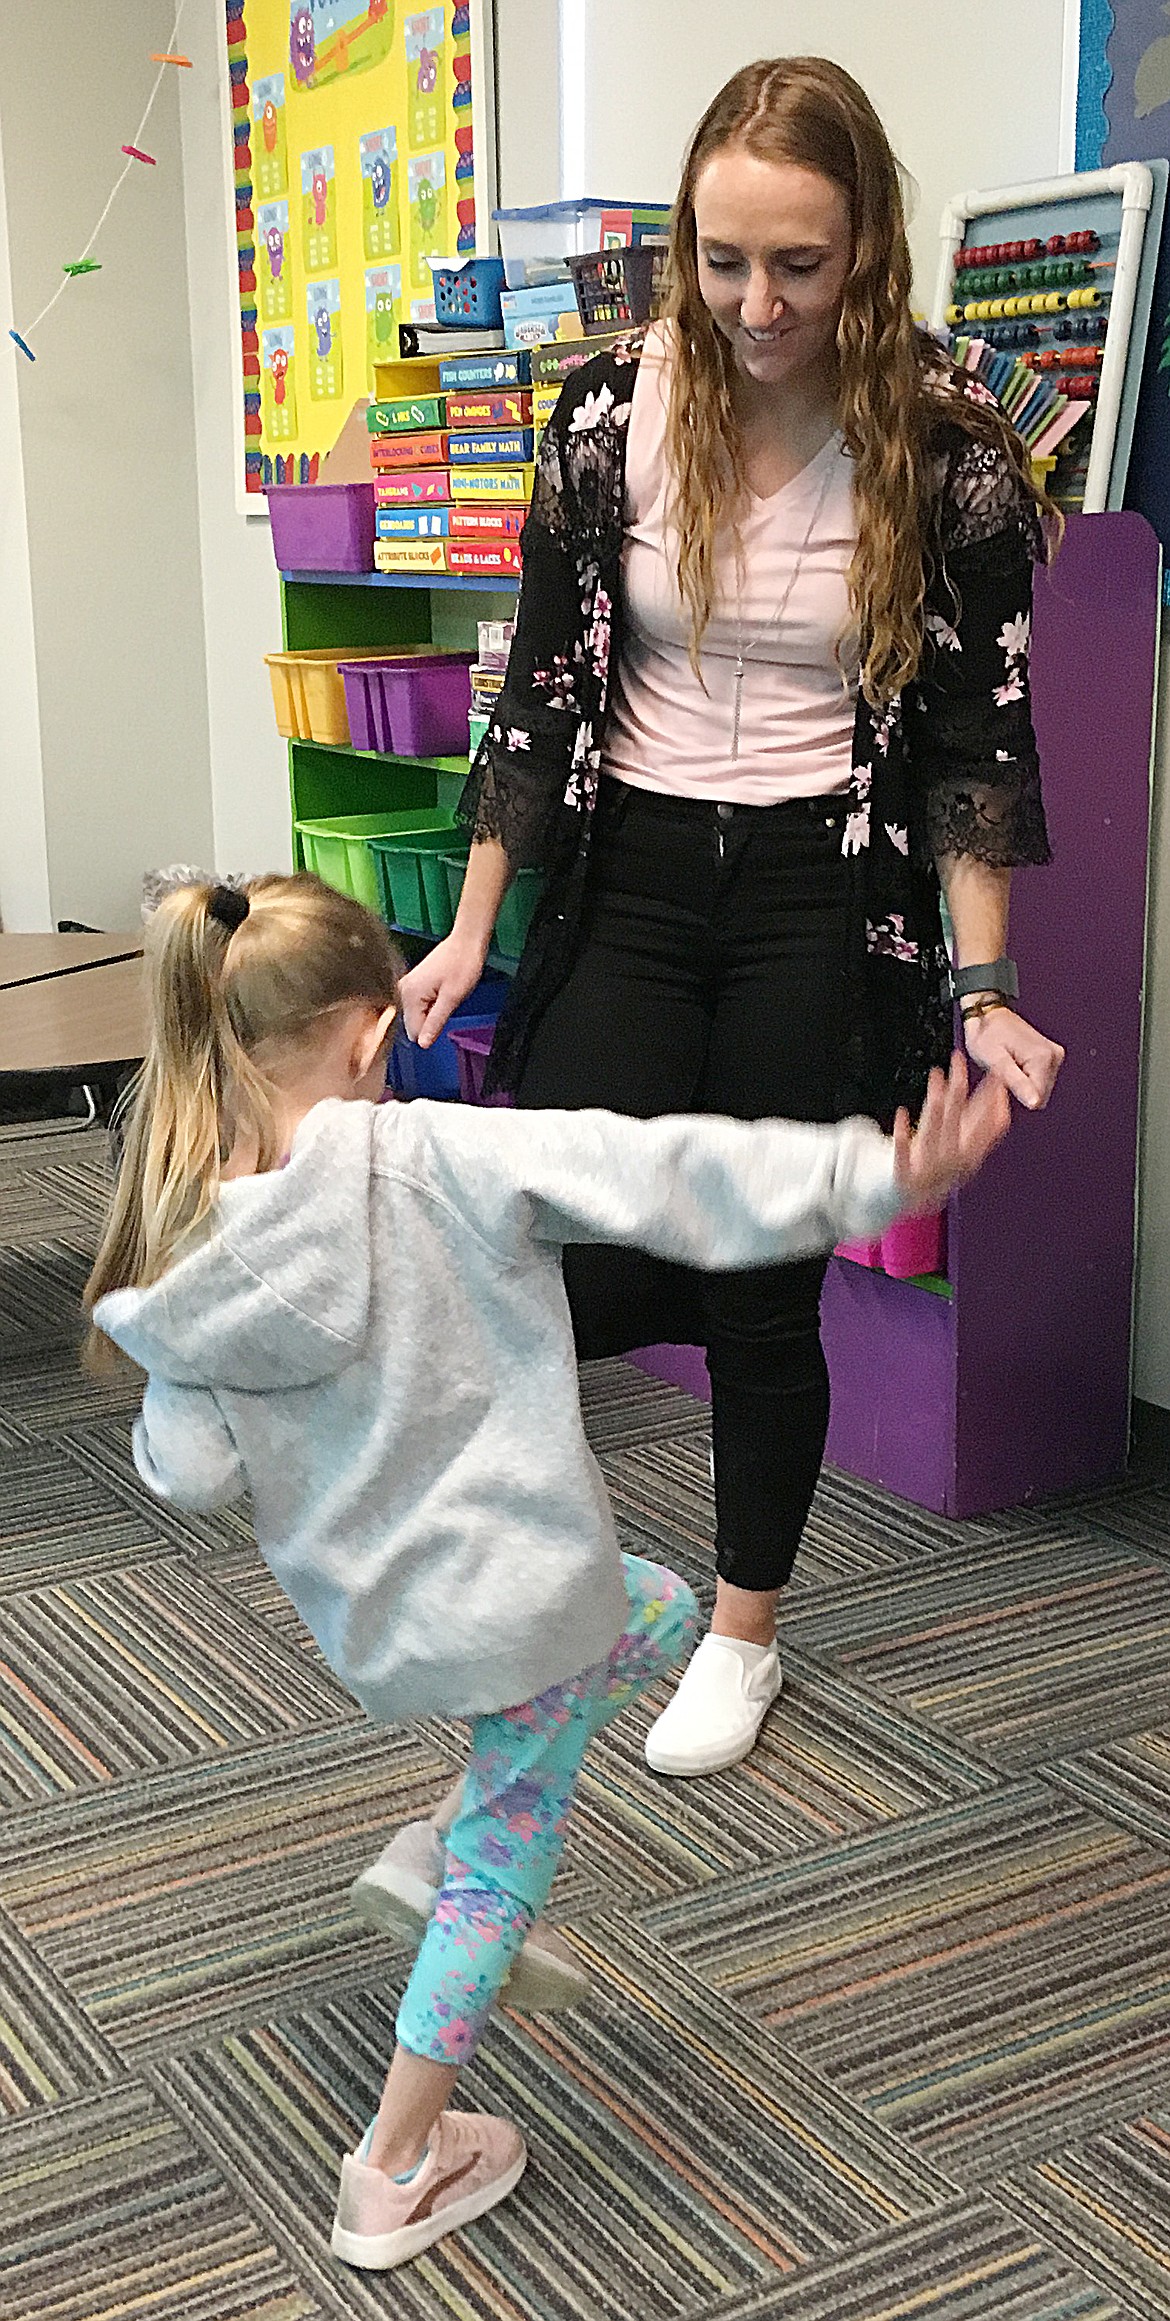 KYRIE CARR, 5, enjoys the challenge posed by kindergarten teacher Dani Walker during the registration process activities on April 19 at Plains School.